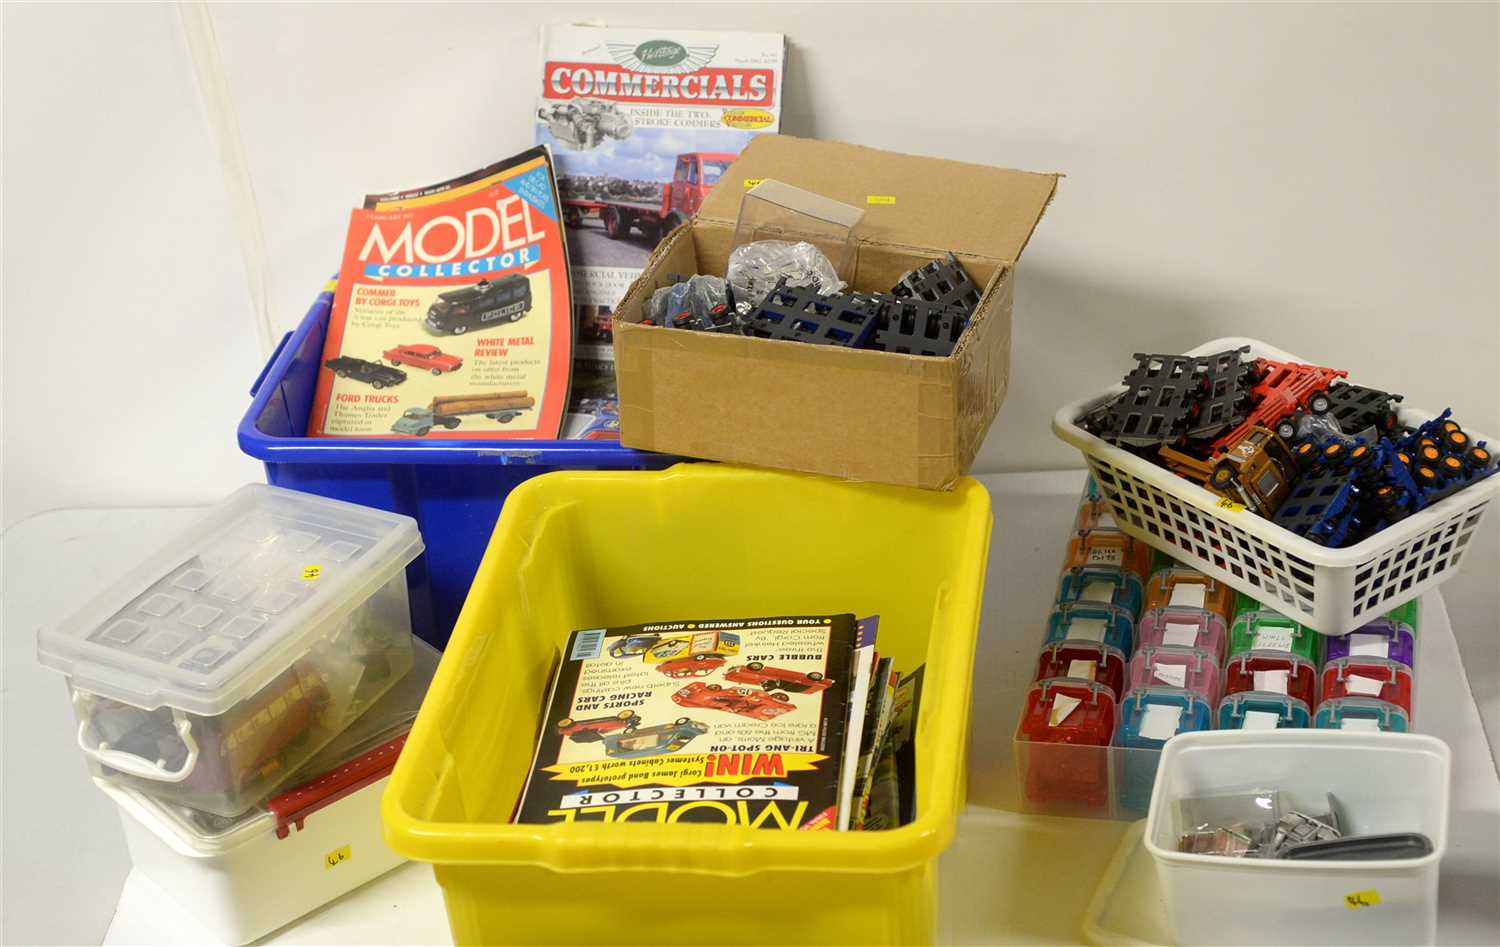 Lot 1294 - Die-cast model vehicle accessories; and qty. of Vintage and Heritage magazines.